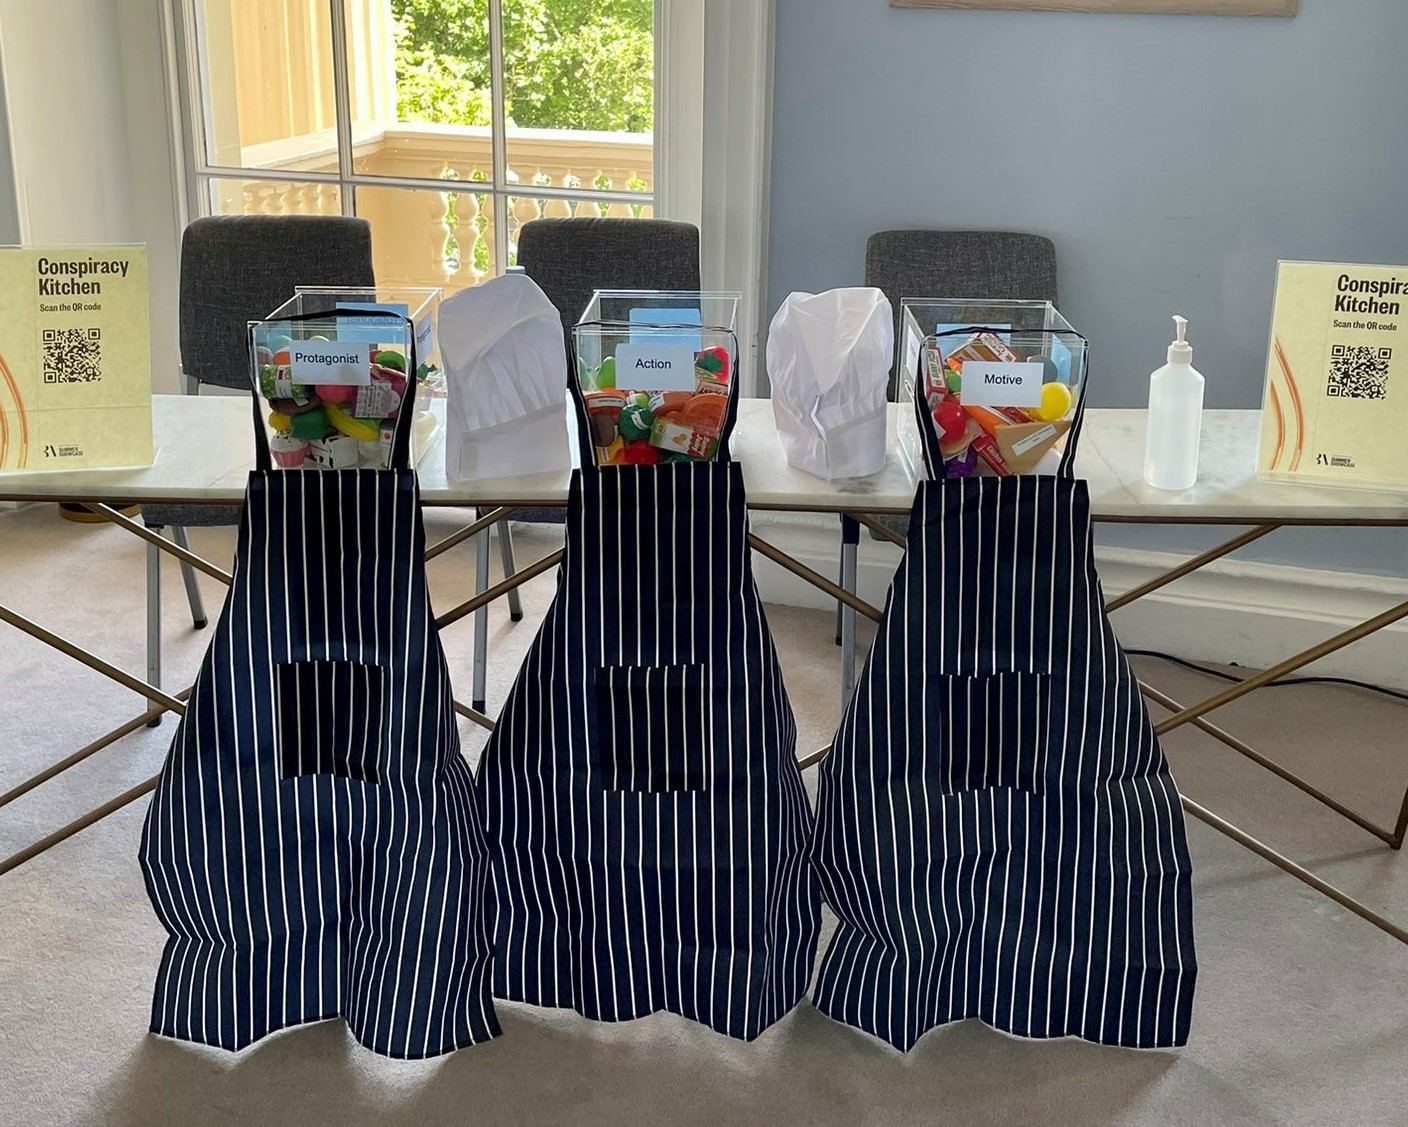 Conspiracy Kitchen activity including three aprons and chef hats